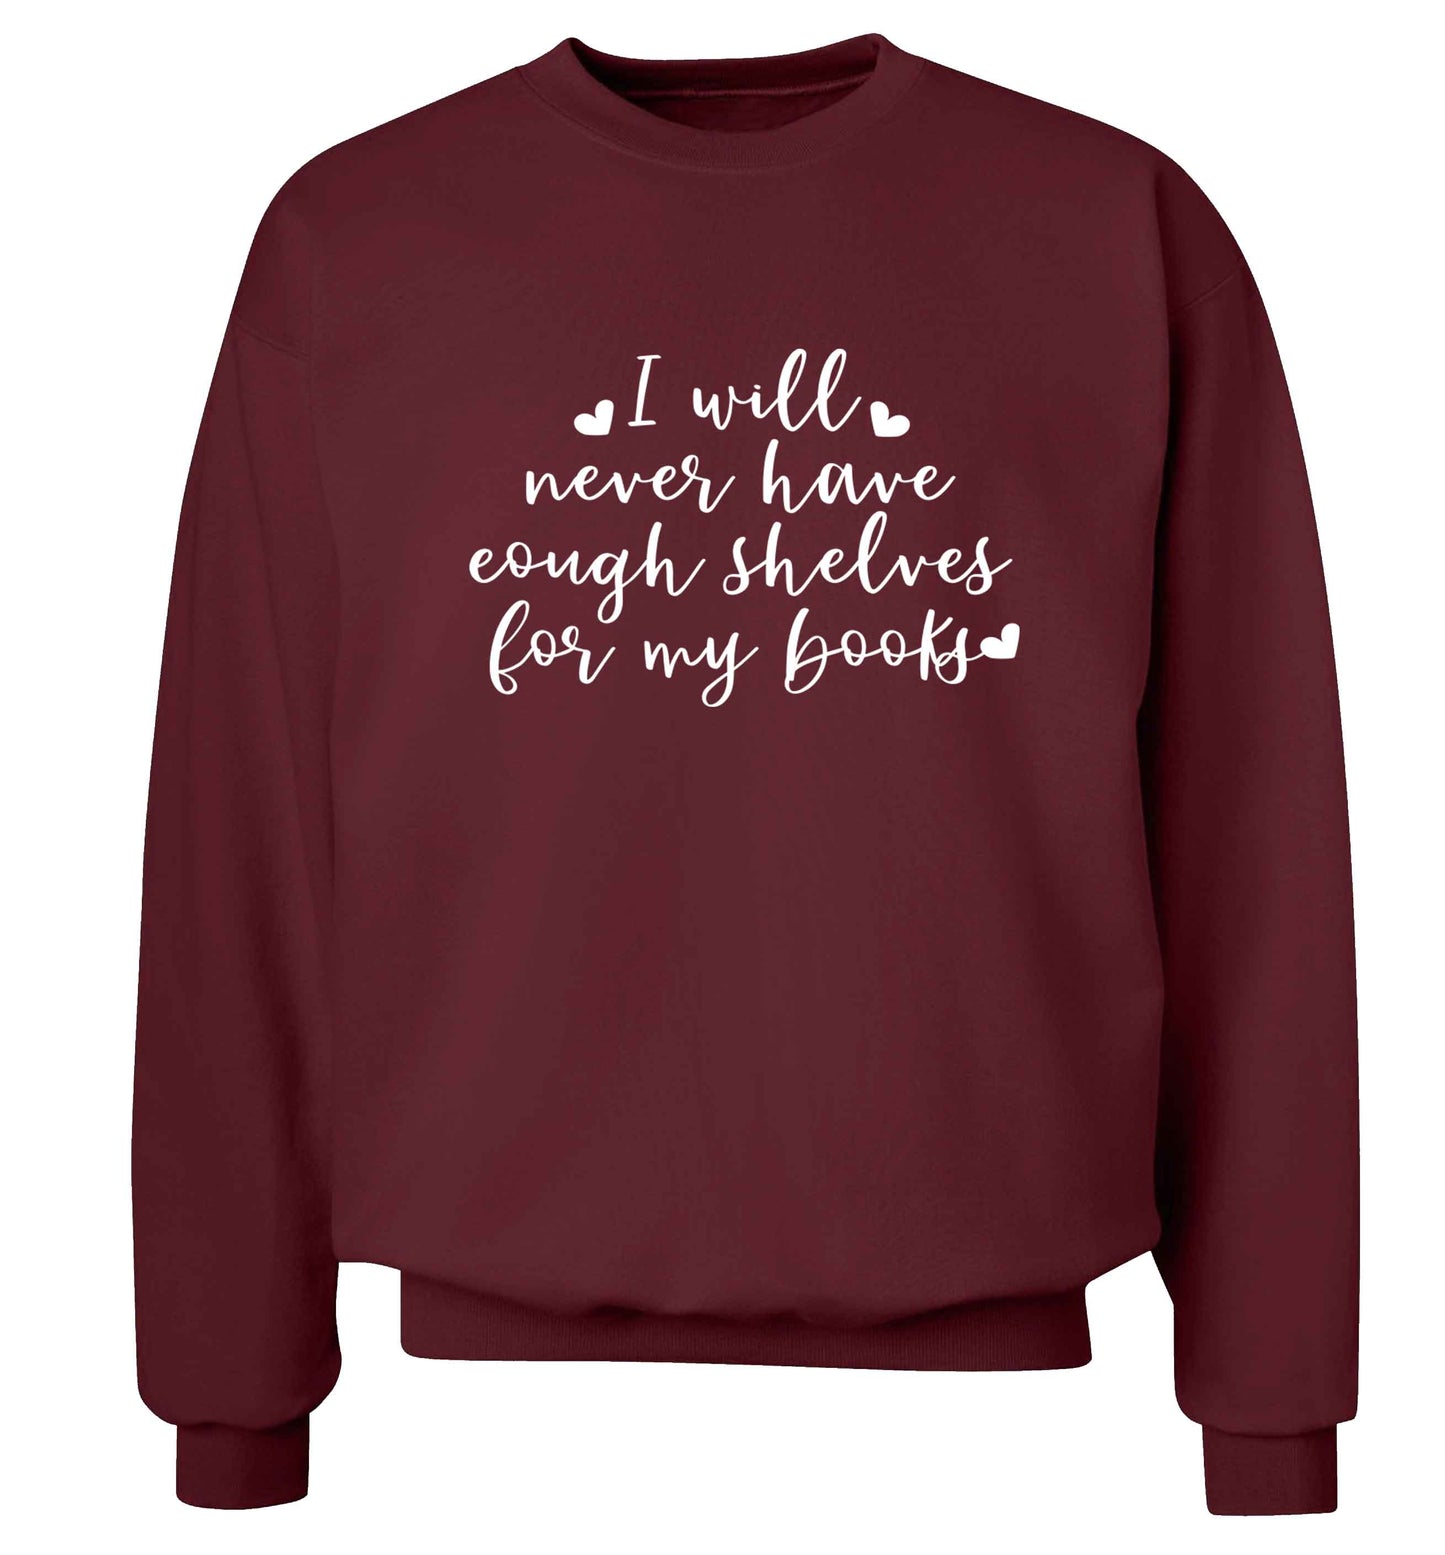 I will never have enough shelves for my books Adult's unisex maroon Sweater 2XL